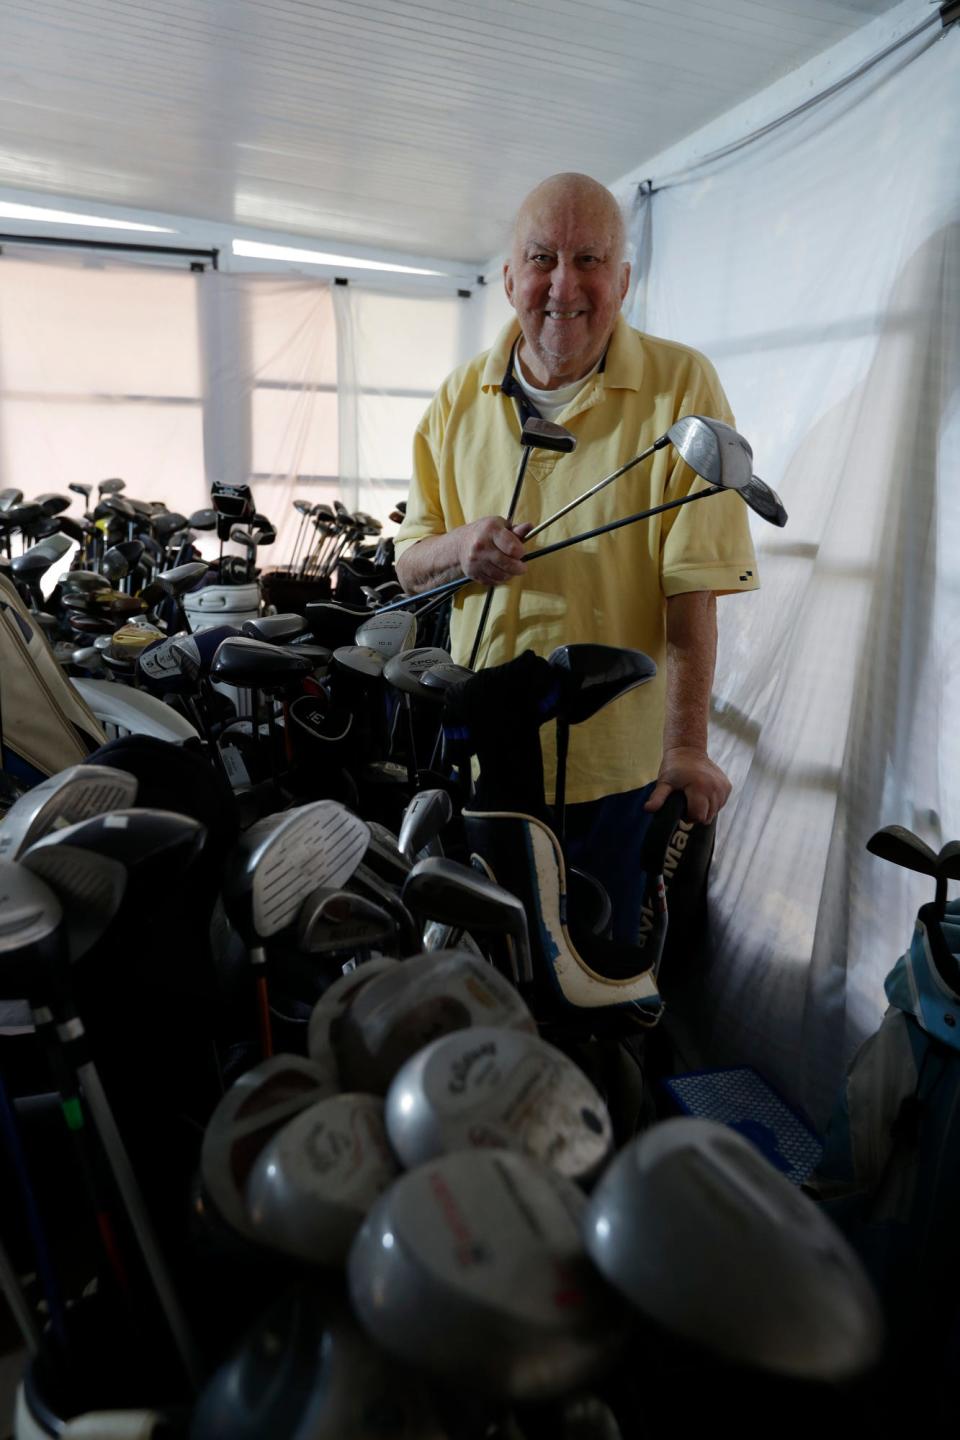 North Fort Myers resident John Berg has been an avid golf club collector for about 25 years.